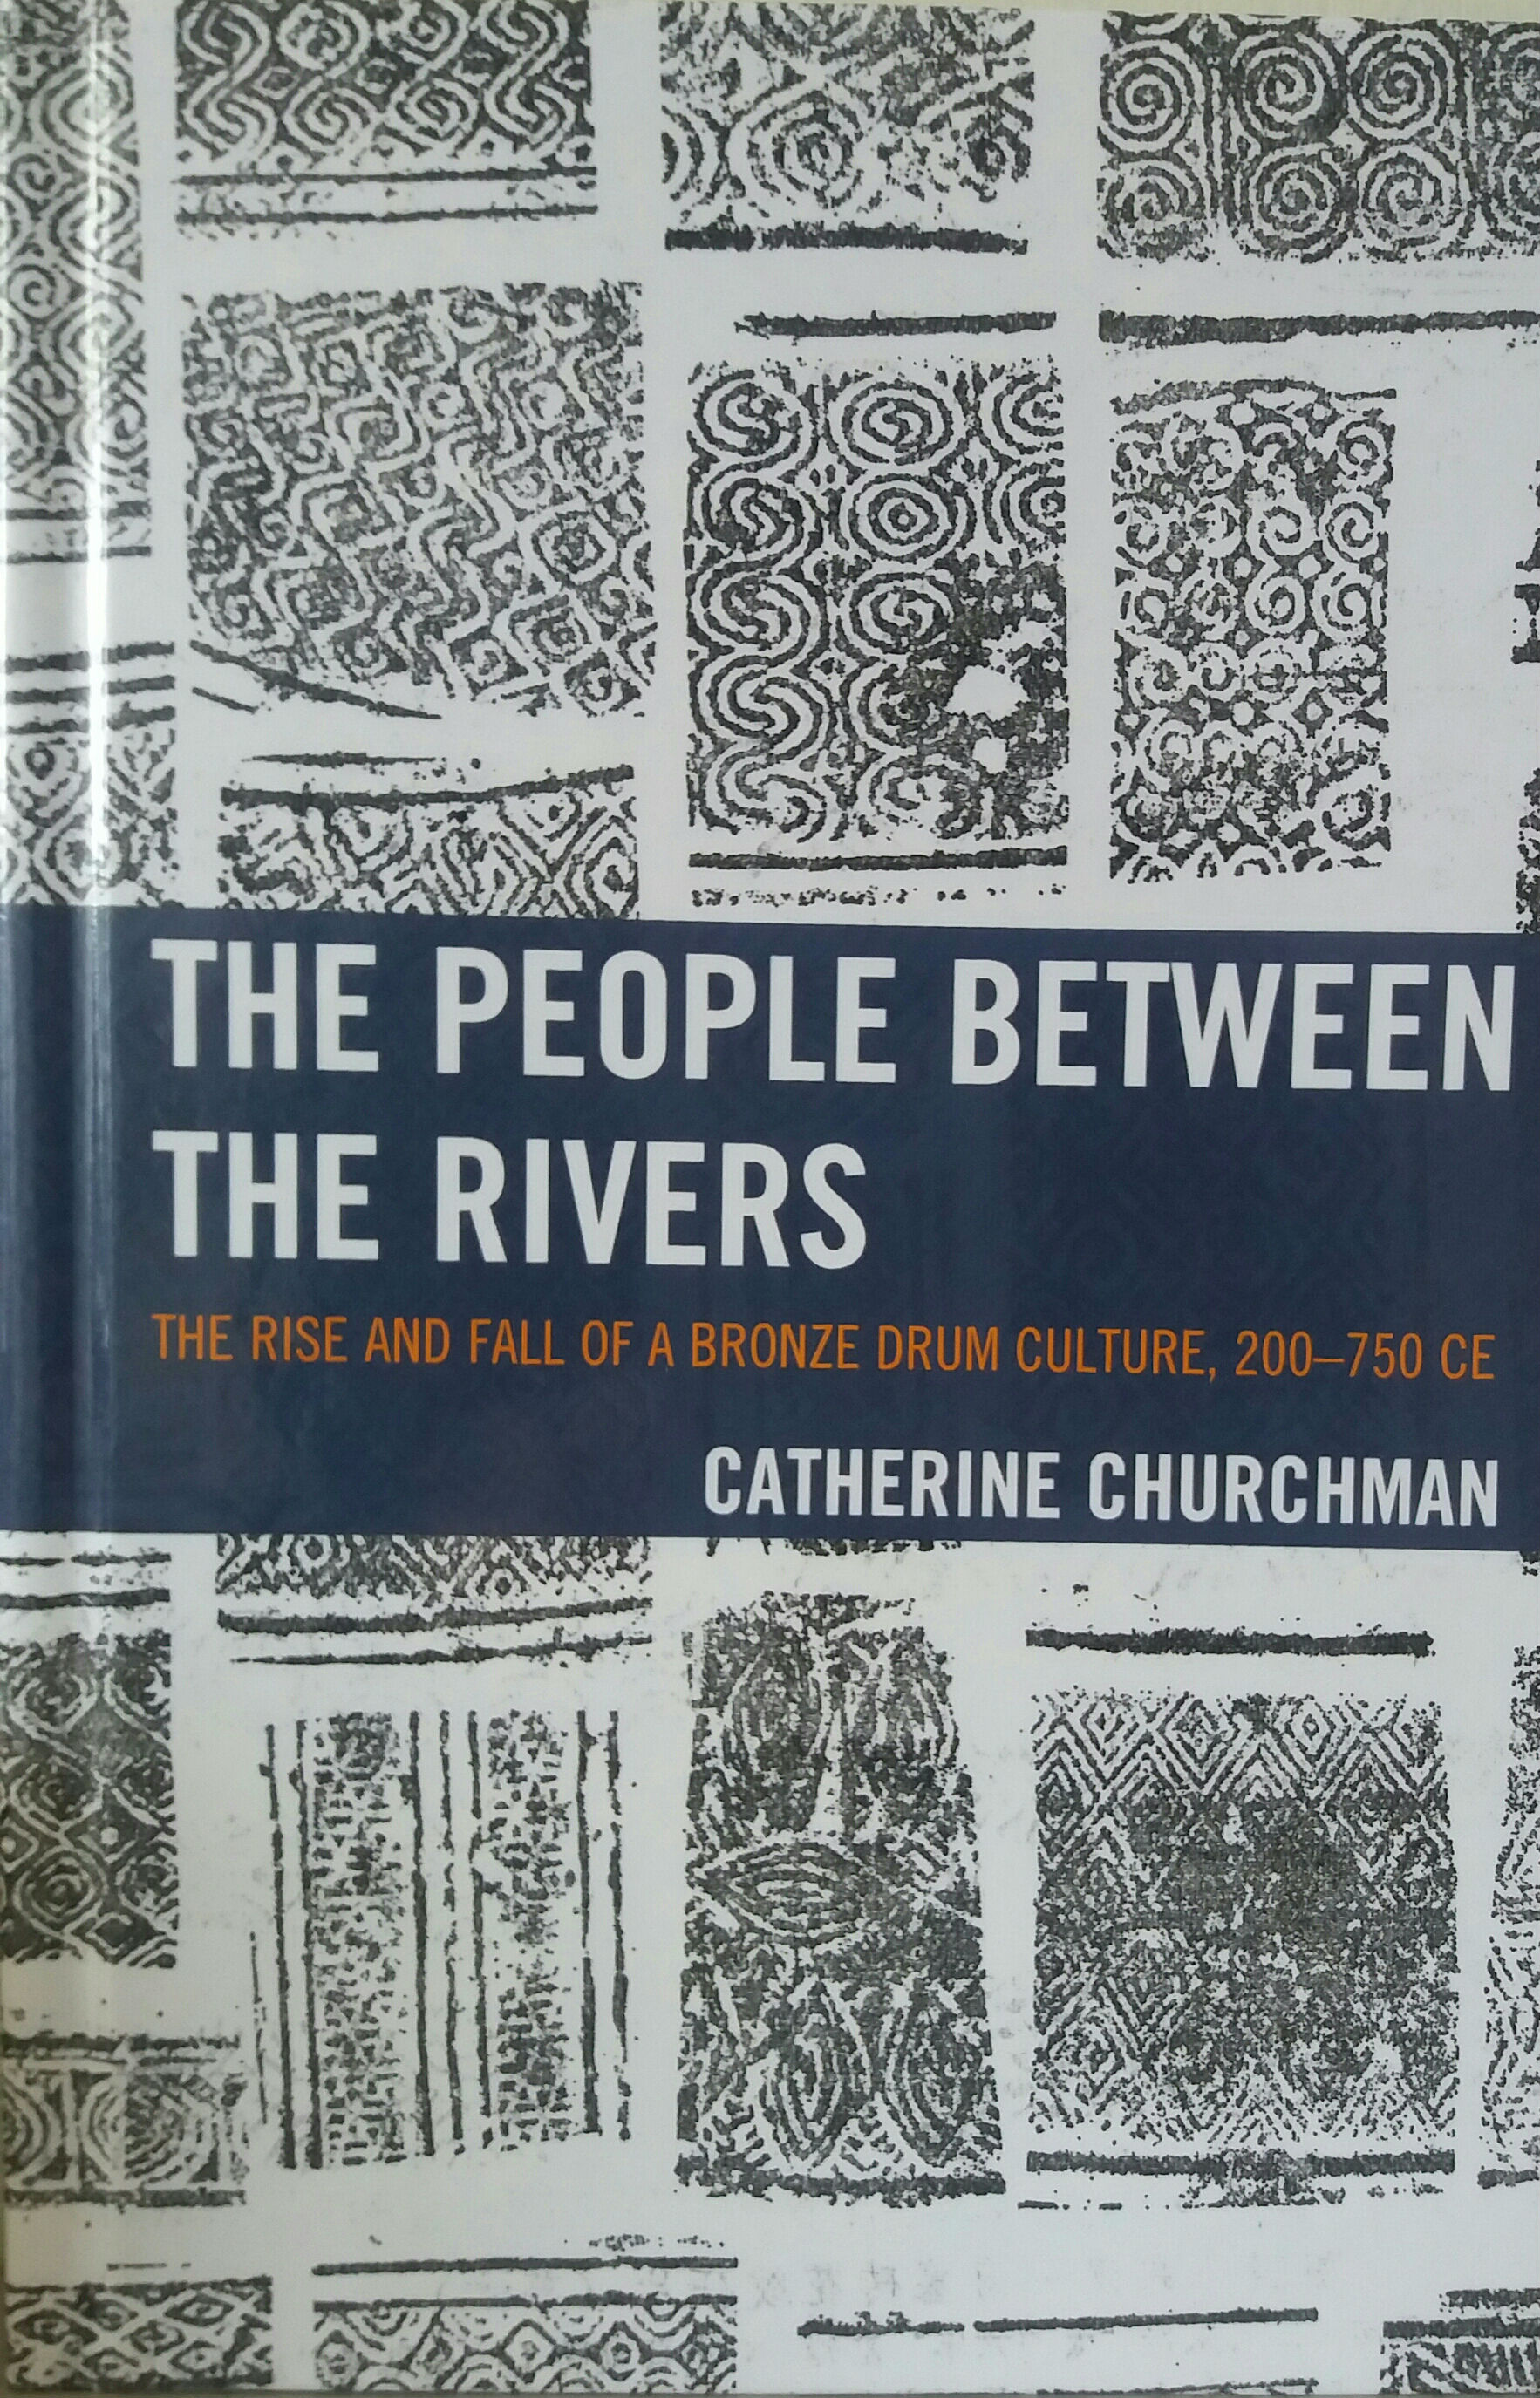 Cover of Catherine Churchman's book 'The People Between The Rivers: The rise and fall of a bronze drum culture, 200-750 CE